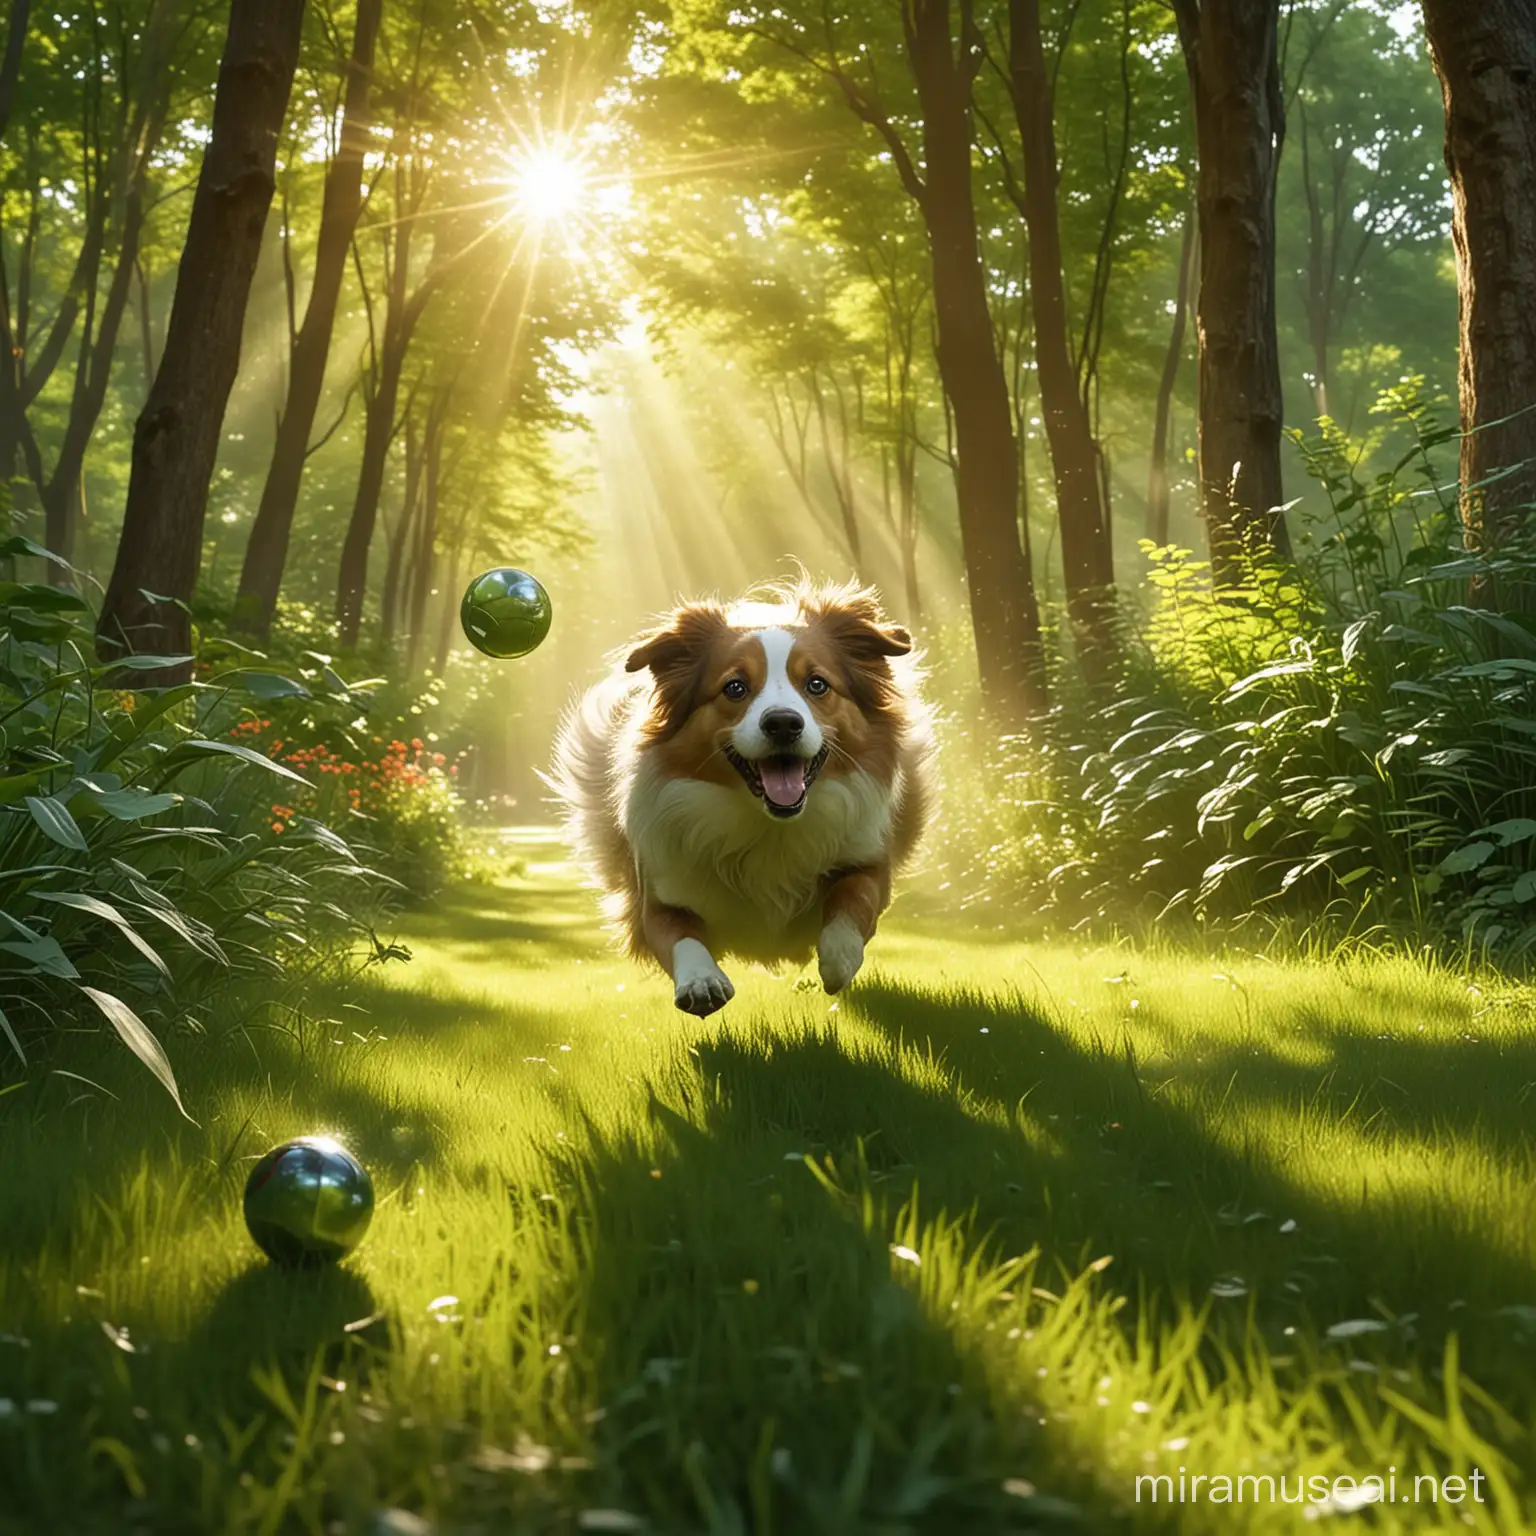 Action shot Illustration capturing a dynamic ball chase in a lively park setting. The playful pet and its owner engage in a joyful pursuit, surrounded by lush trees illuminated by vibrant sunrays filtering through the foliage. The scene conveys a sense of movement and excitement as the ball bounces across the verdant grass. --ar 3:2 --s 500